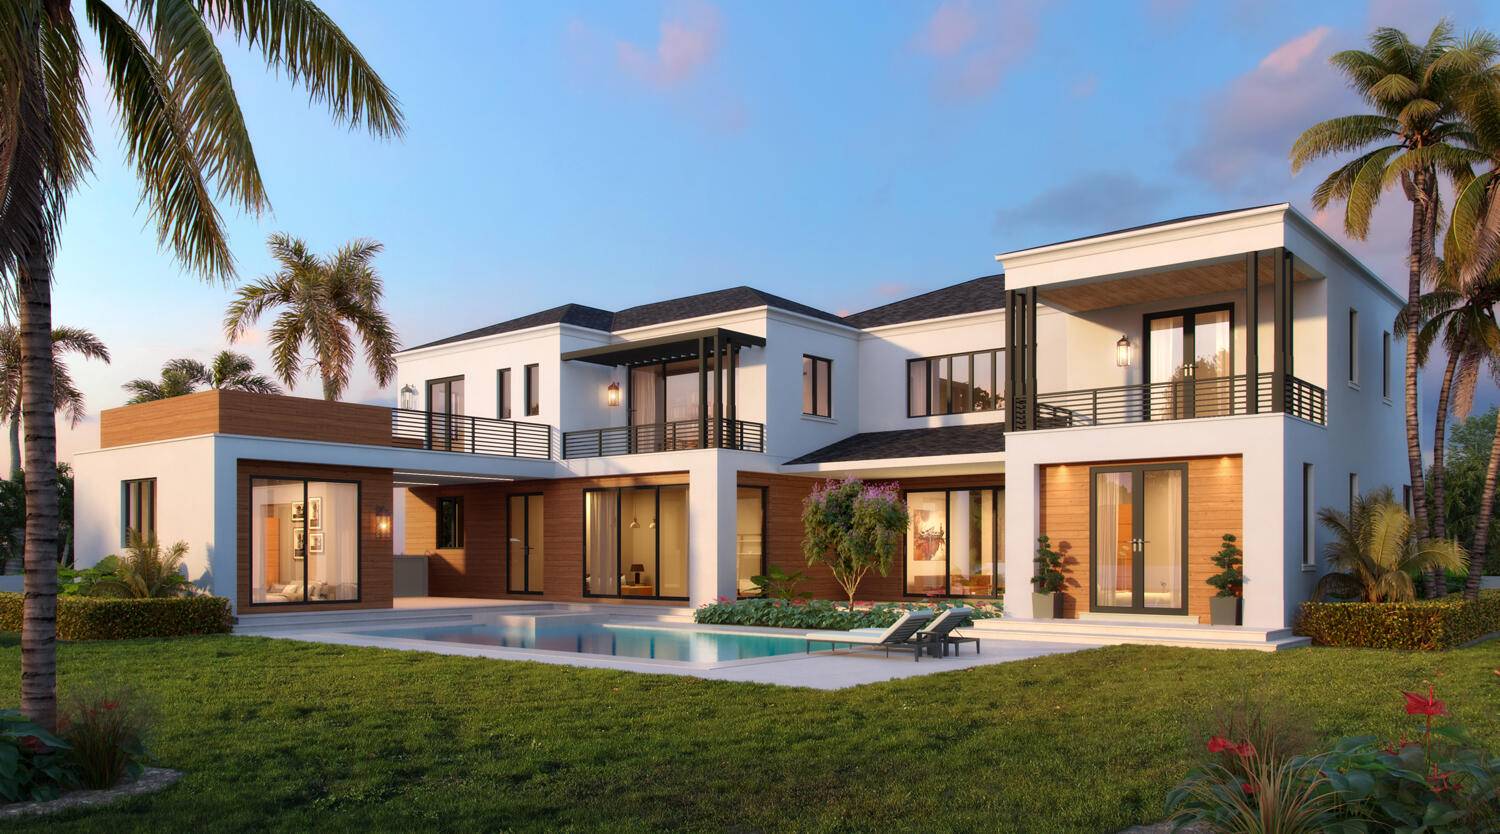 New Construction Opportunity in the very sought after South of Southern Neighborhood in West Palm Beach.